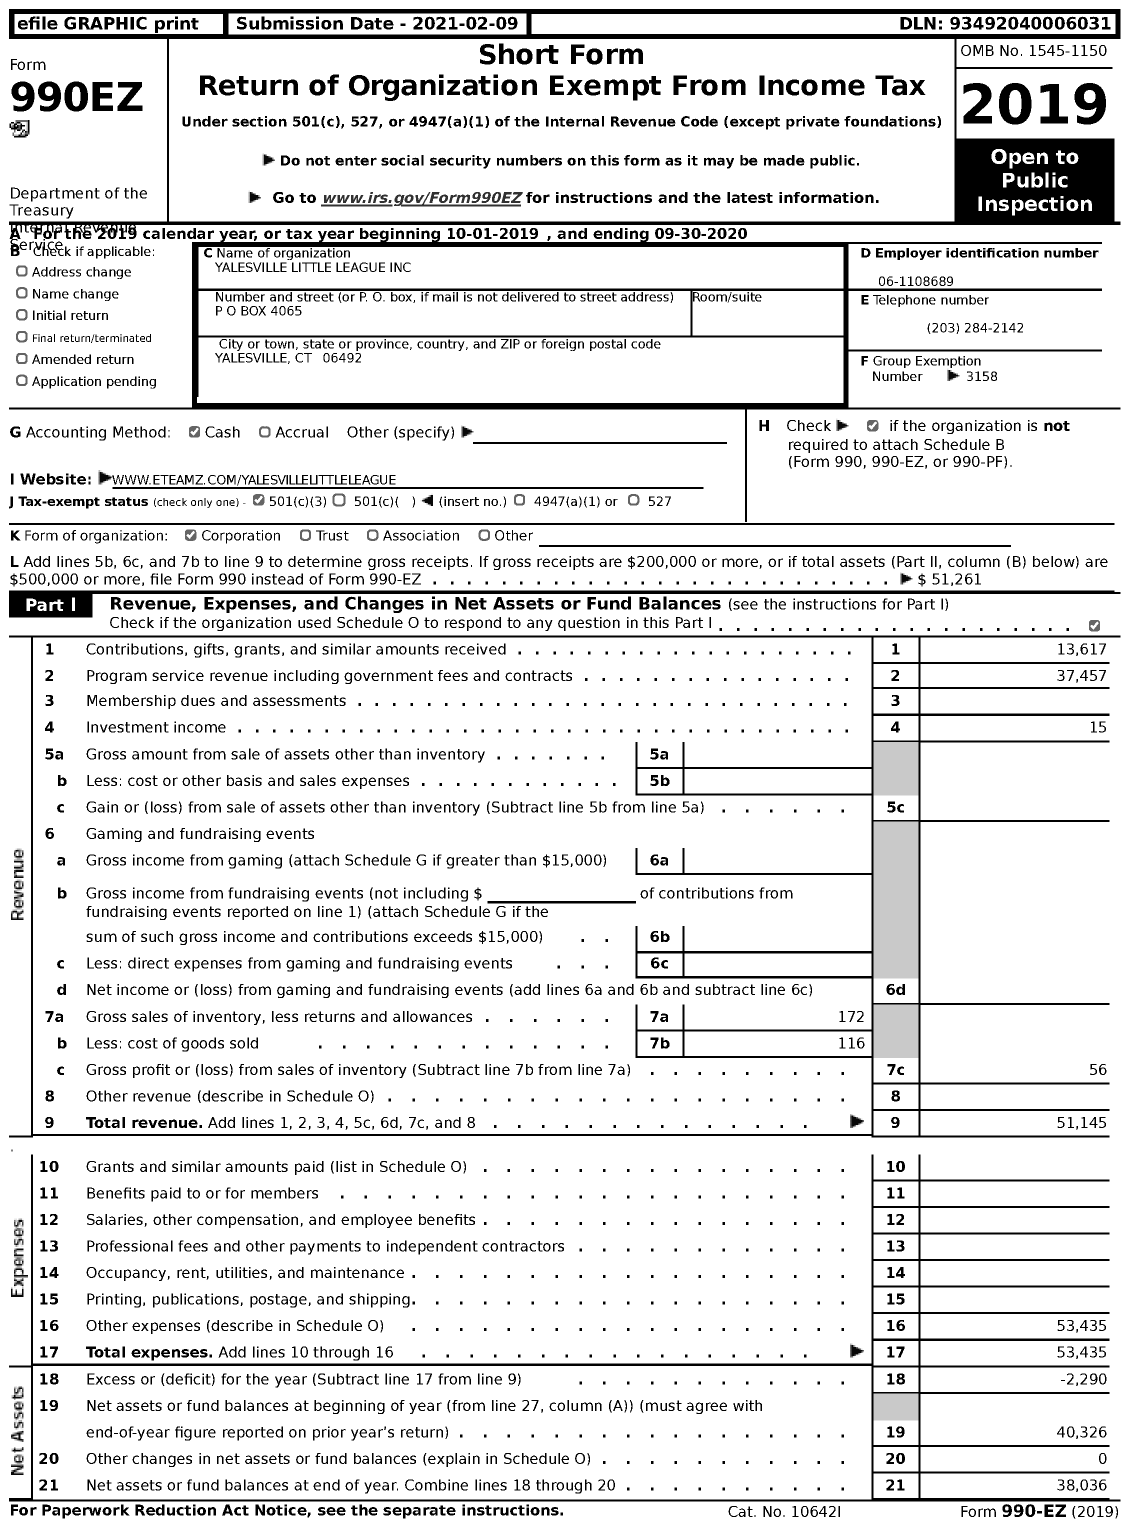 Image of first page of 2019 Form 990EZ for Little League Baseball - 2070519 Yalesville LL